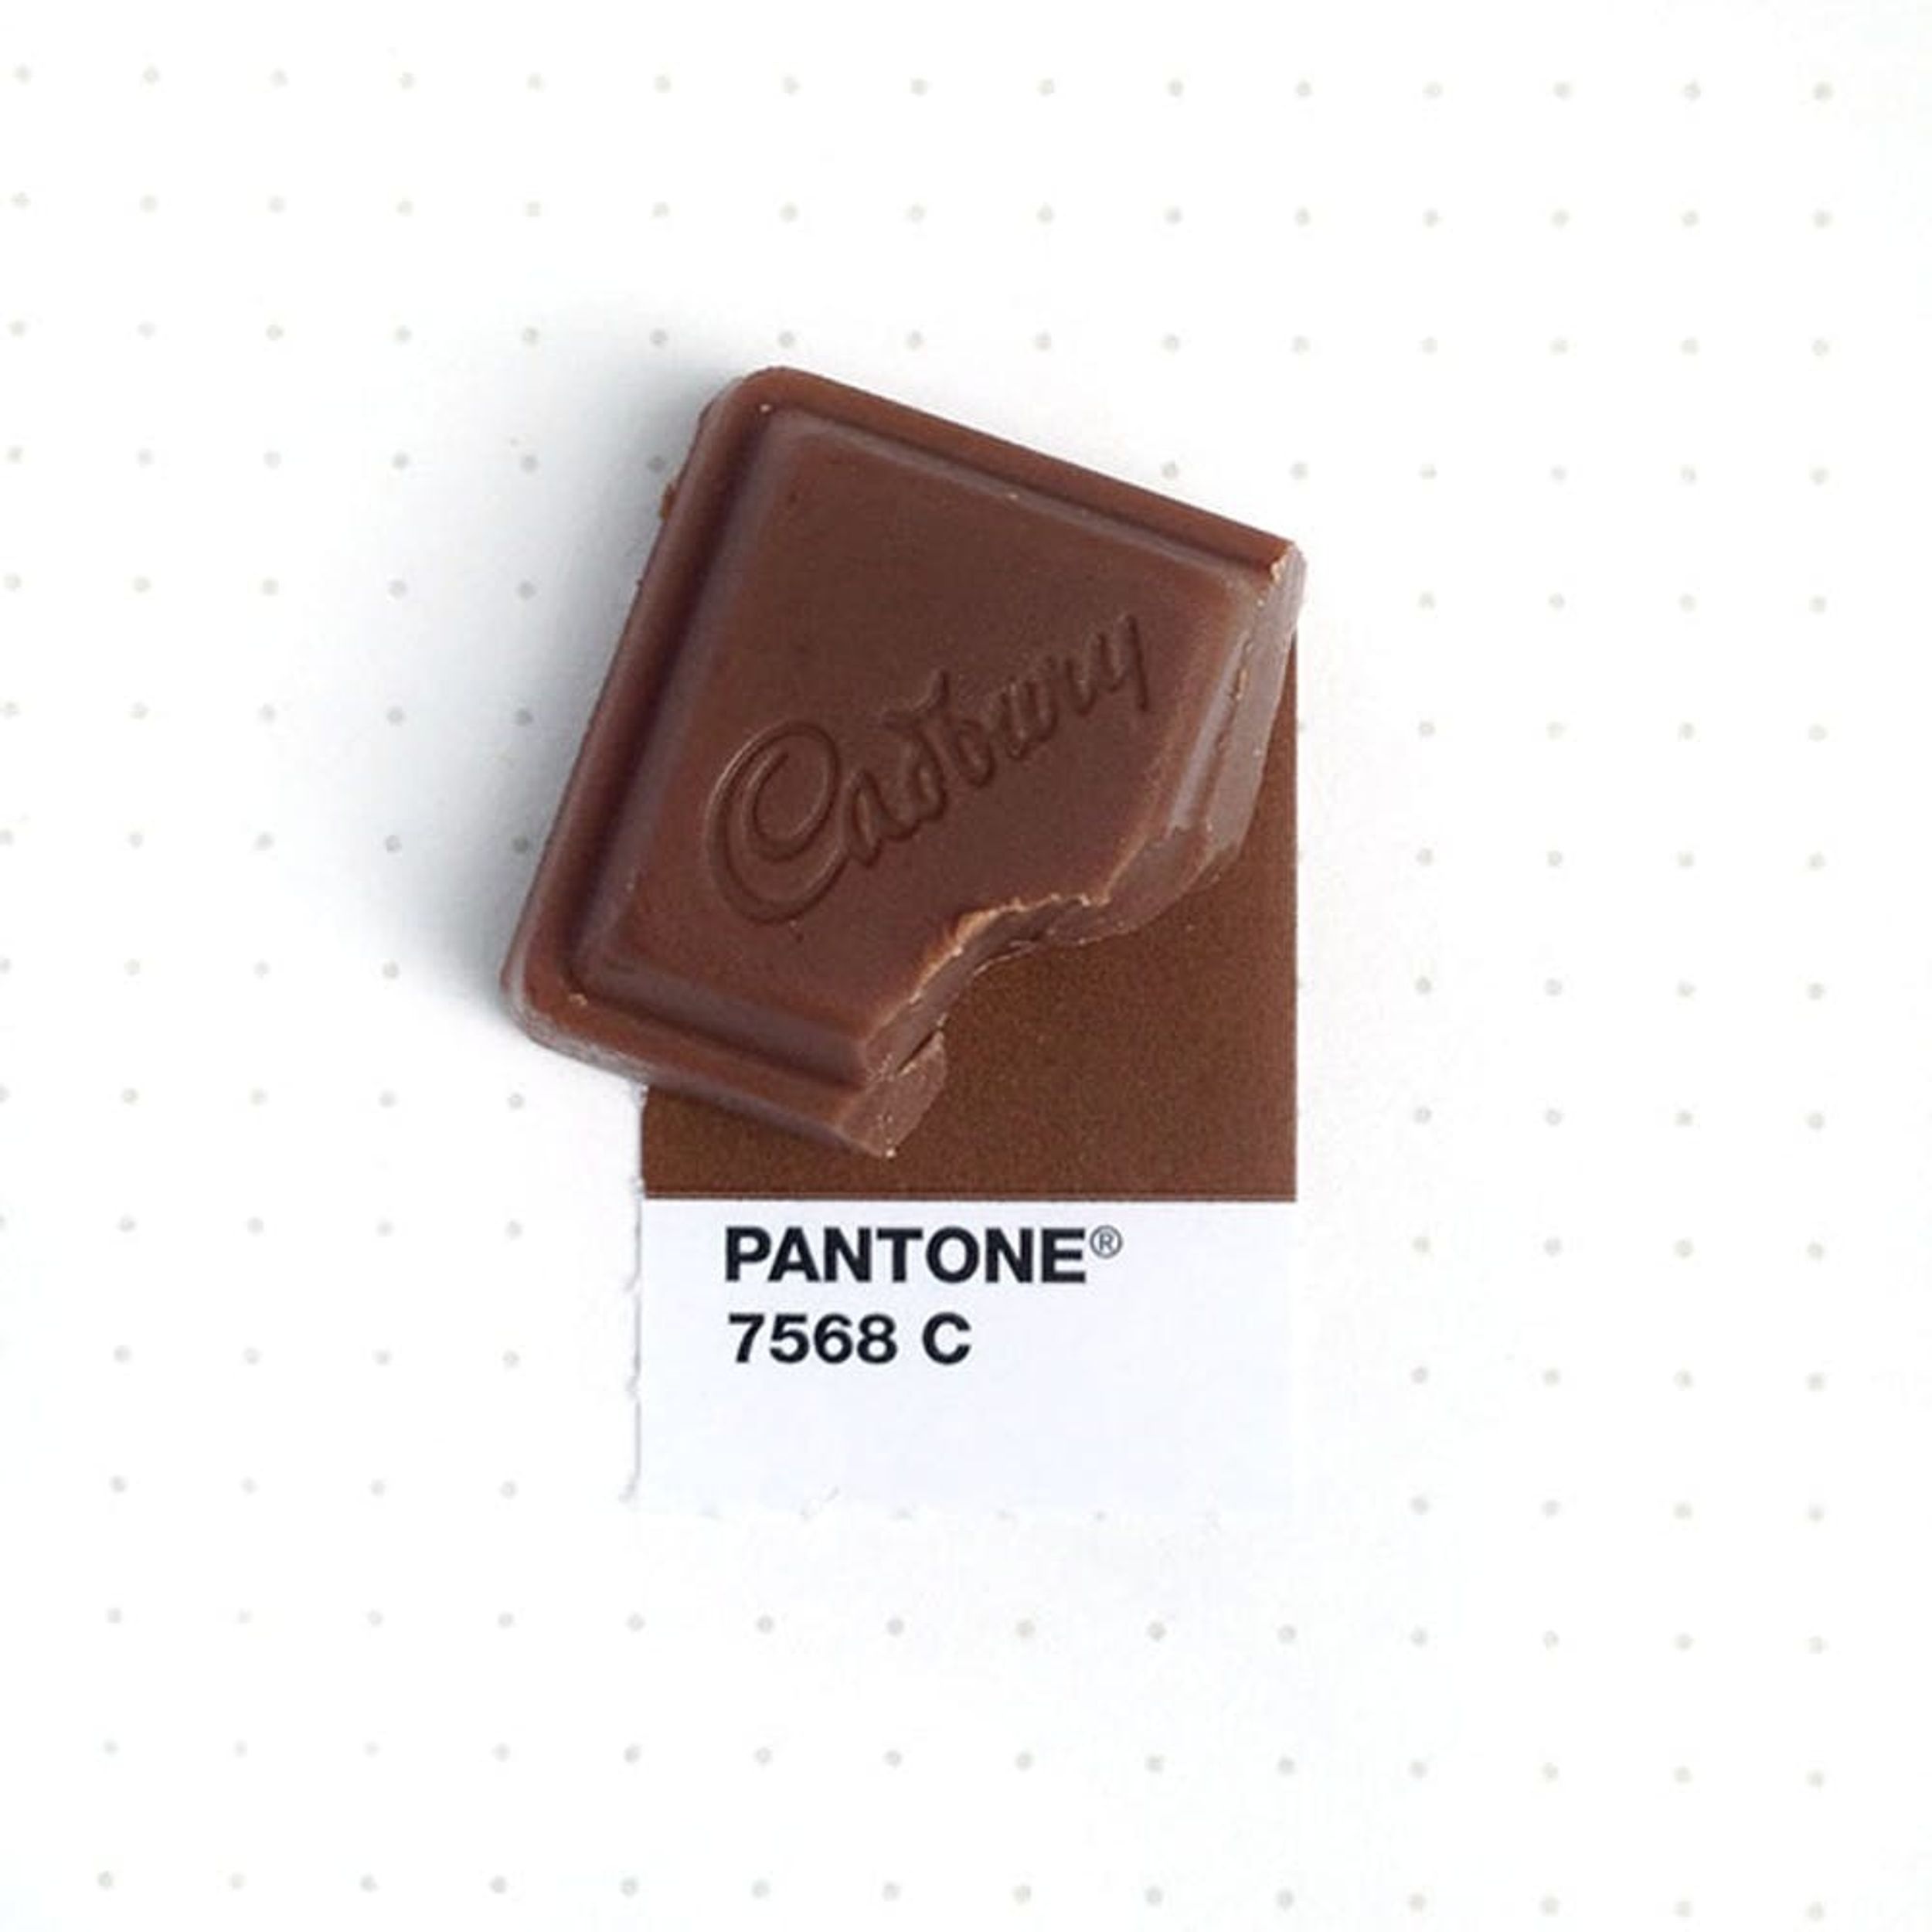 This Artist Pairs Pantone Colors With Real-Life Mini Matching Objects